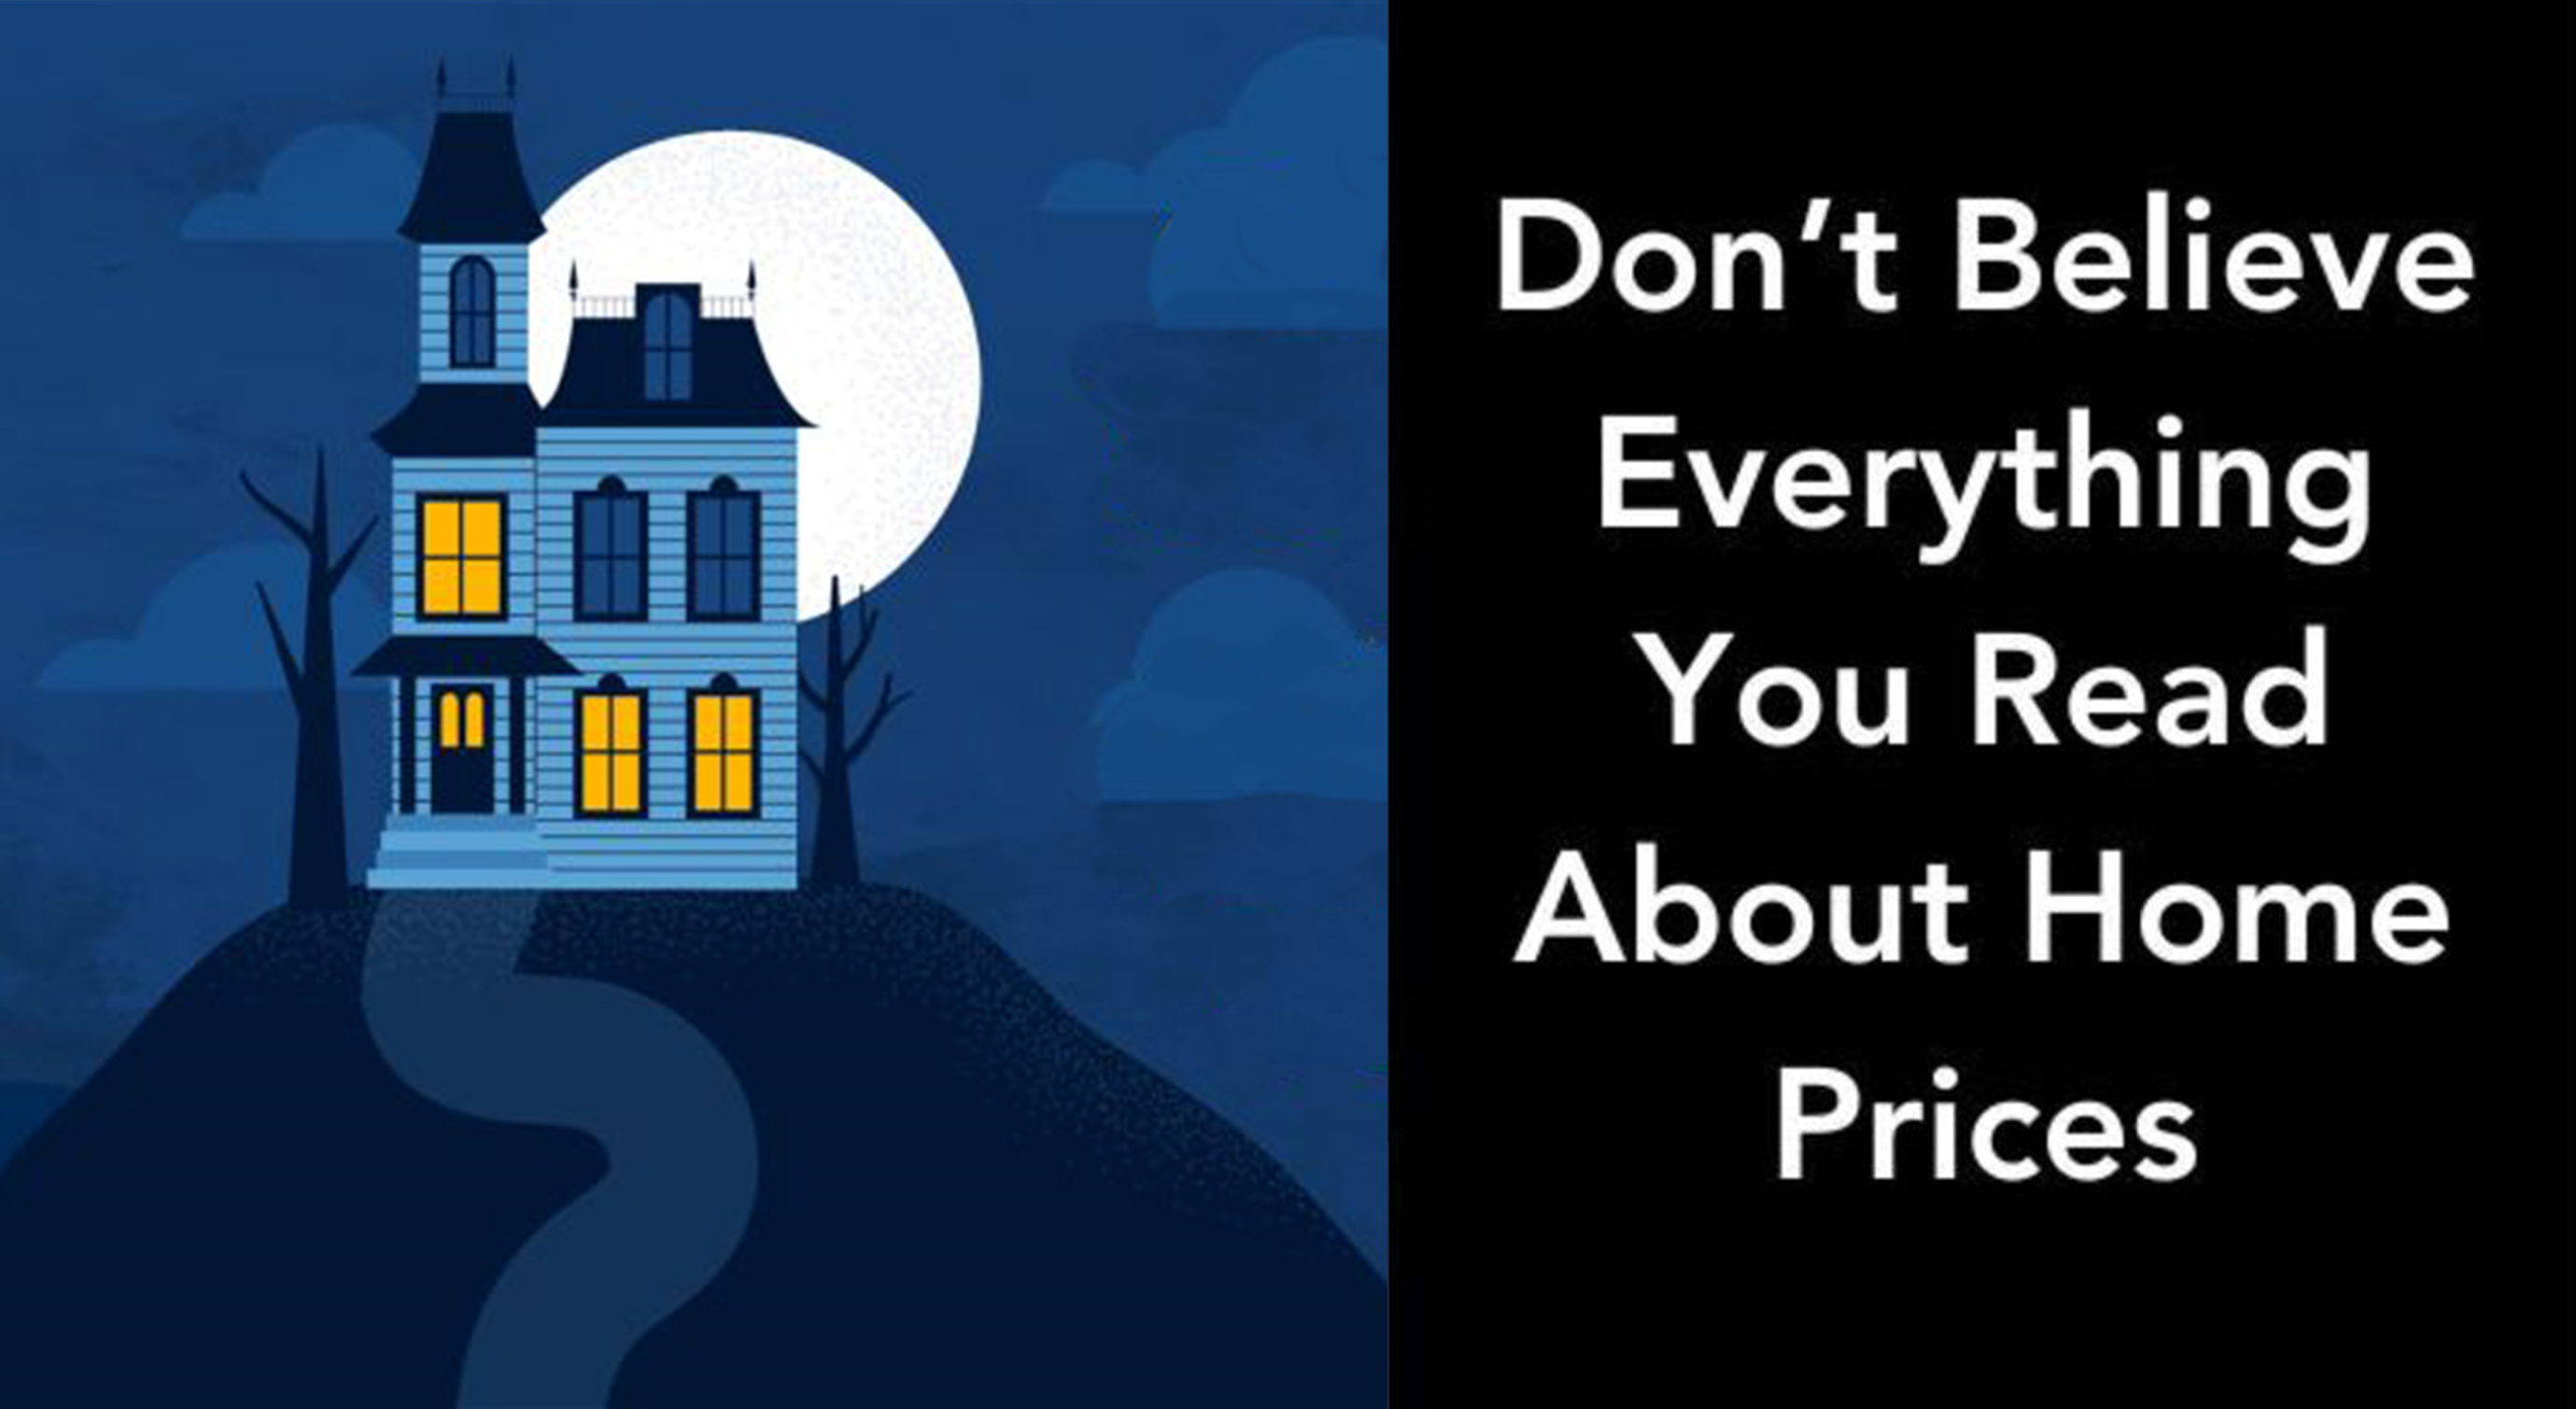 Don’t Believe Everything You Read About Home Prices